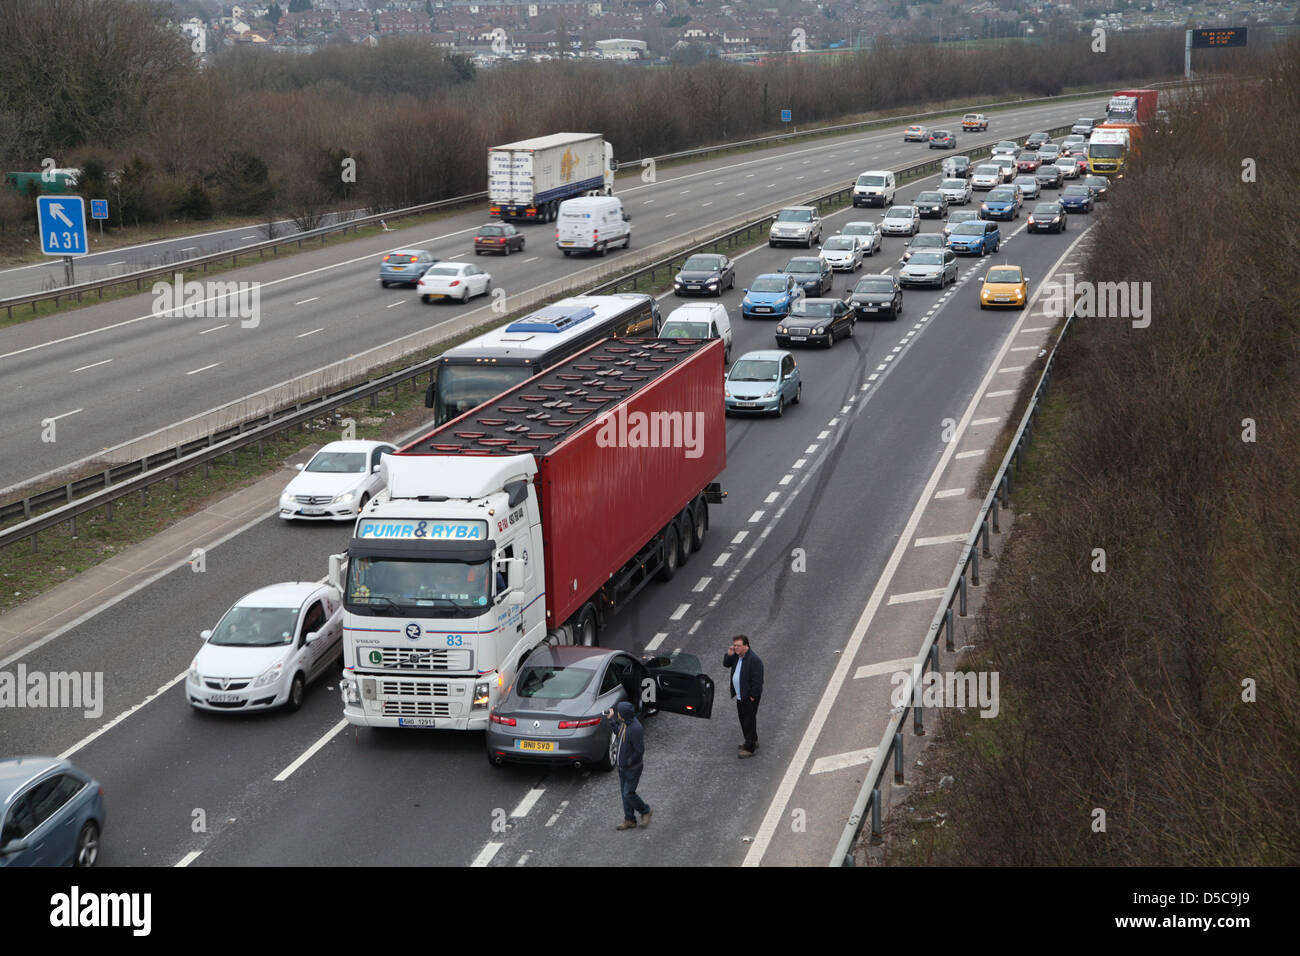 Winchester,UK. 28 March 2013 - An incident on the M3 motorway between Jct. 10 & 11 in Hampshire involving an articulated lorry and a Renault Laguna. Nobody appeared to be injured but the incident caused tailbacks for an hour. Stock Photo